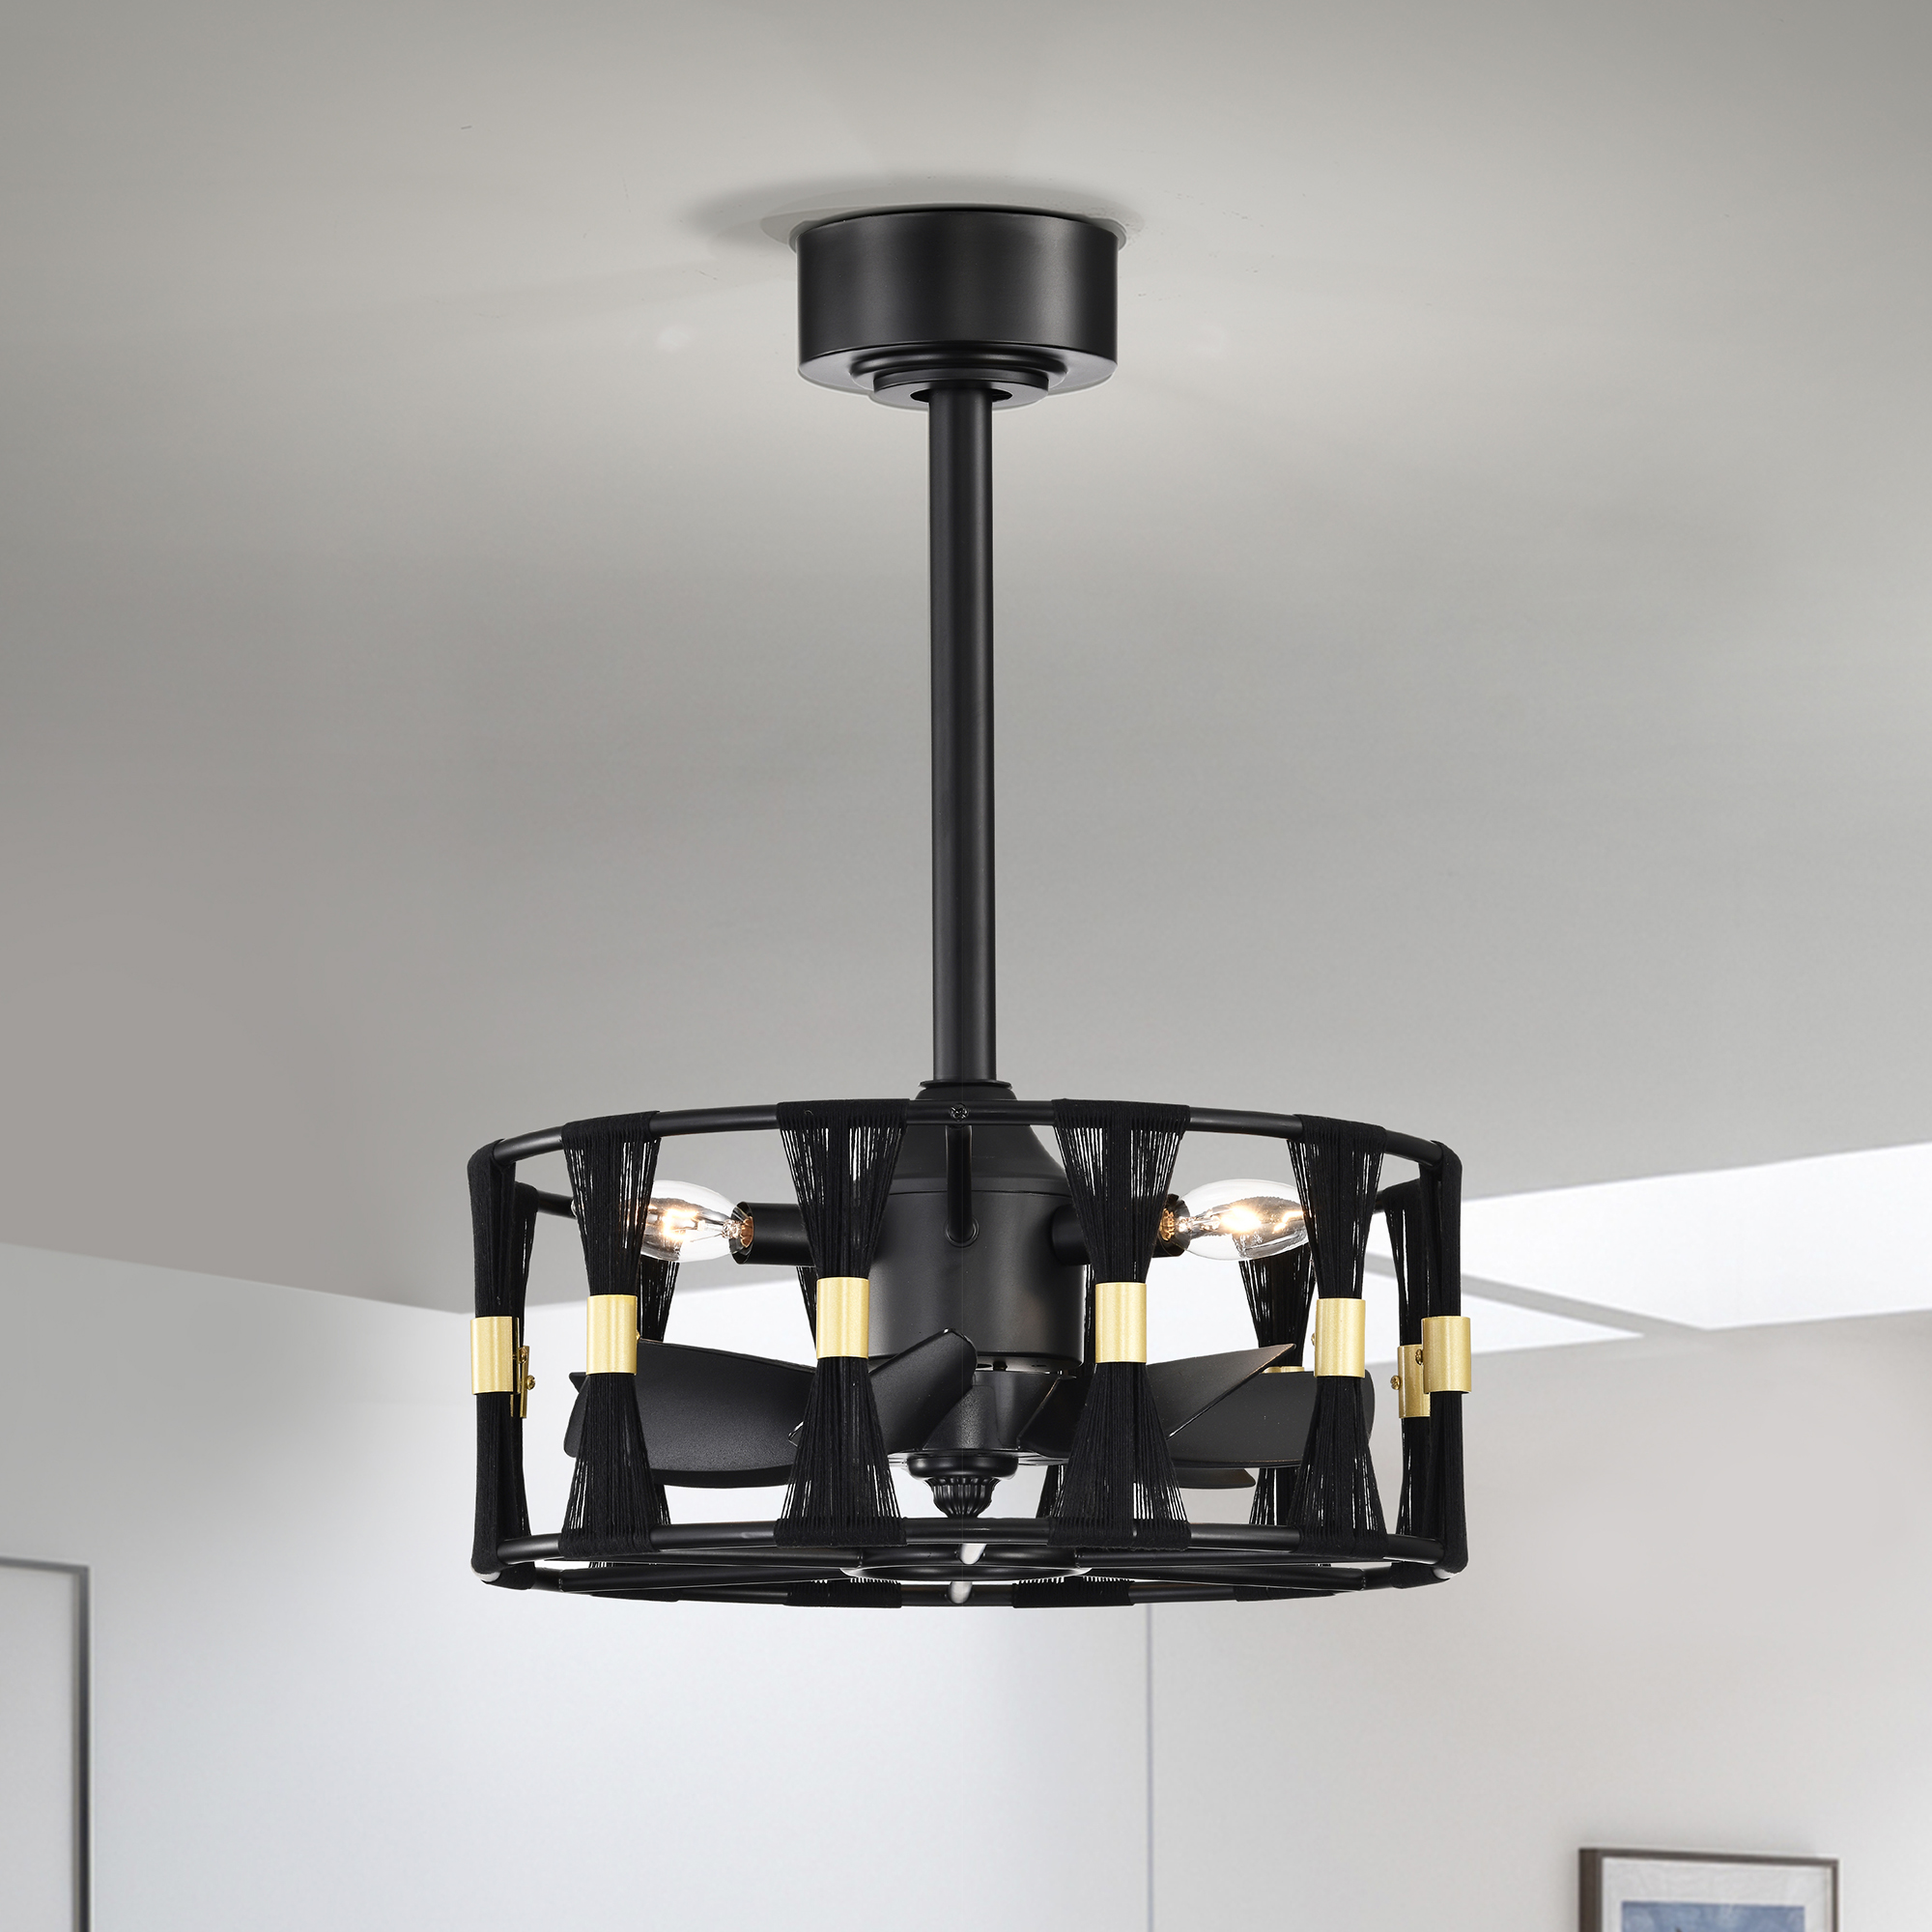 Lutz 15.7 in. 3-Light Indoor Matte Black and Gold Finish Ceiling Fan with Light Kit